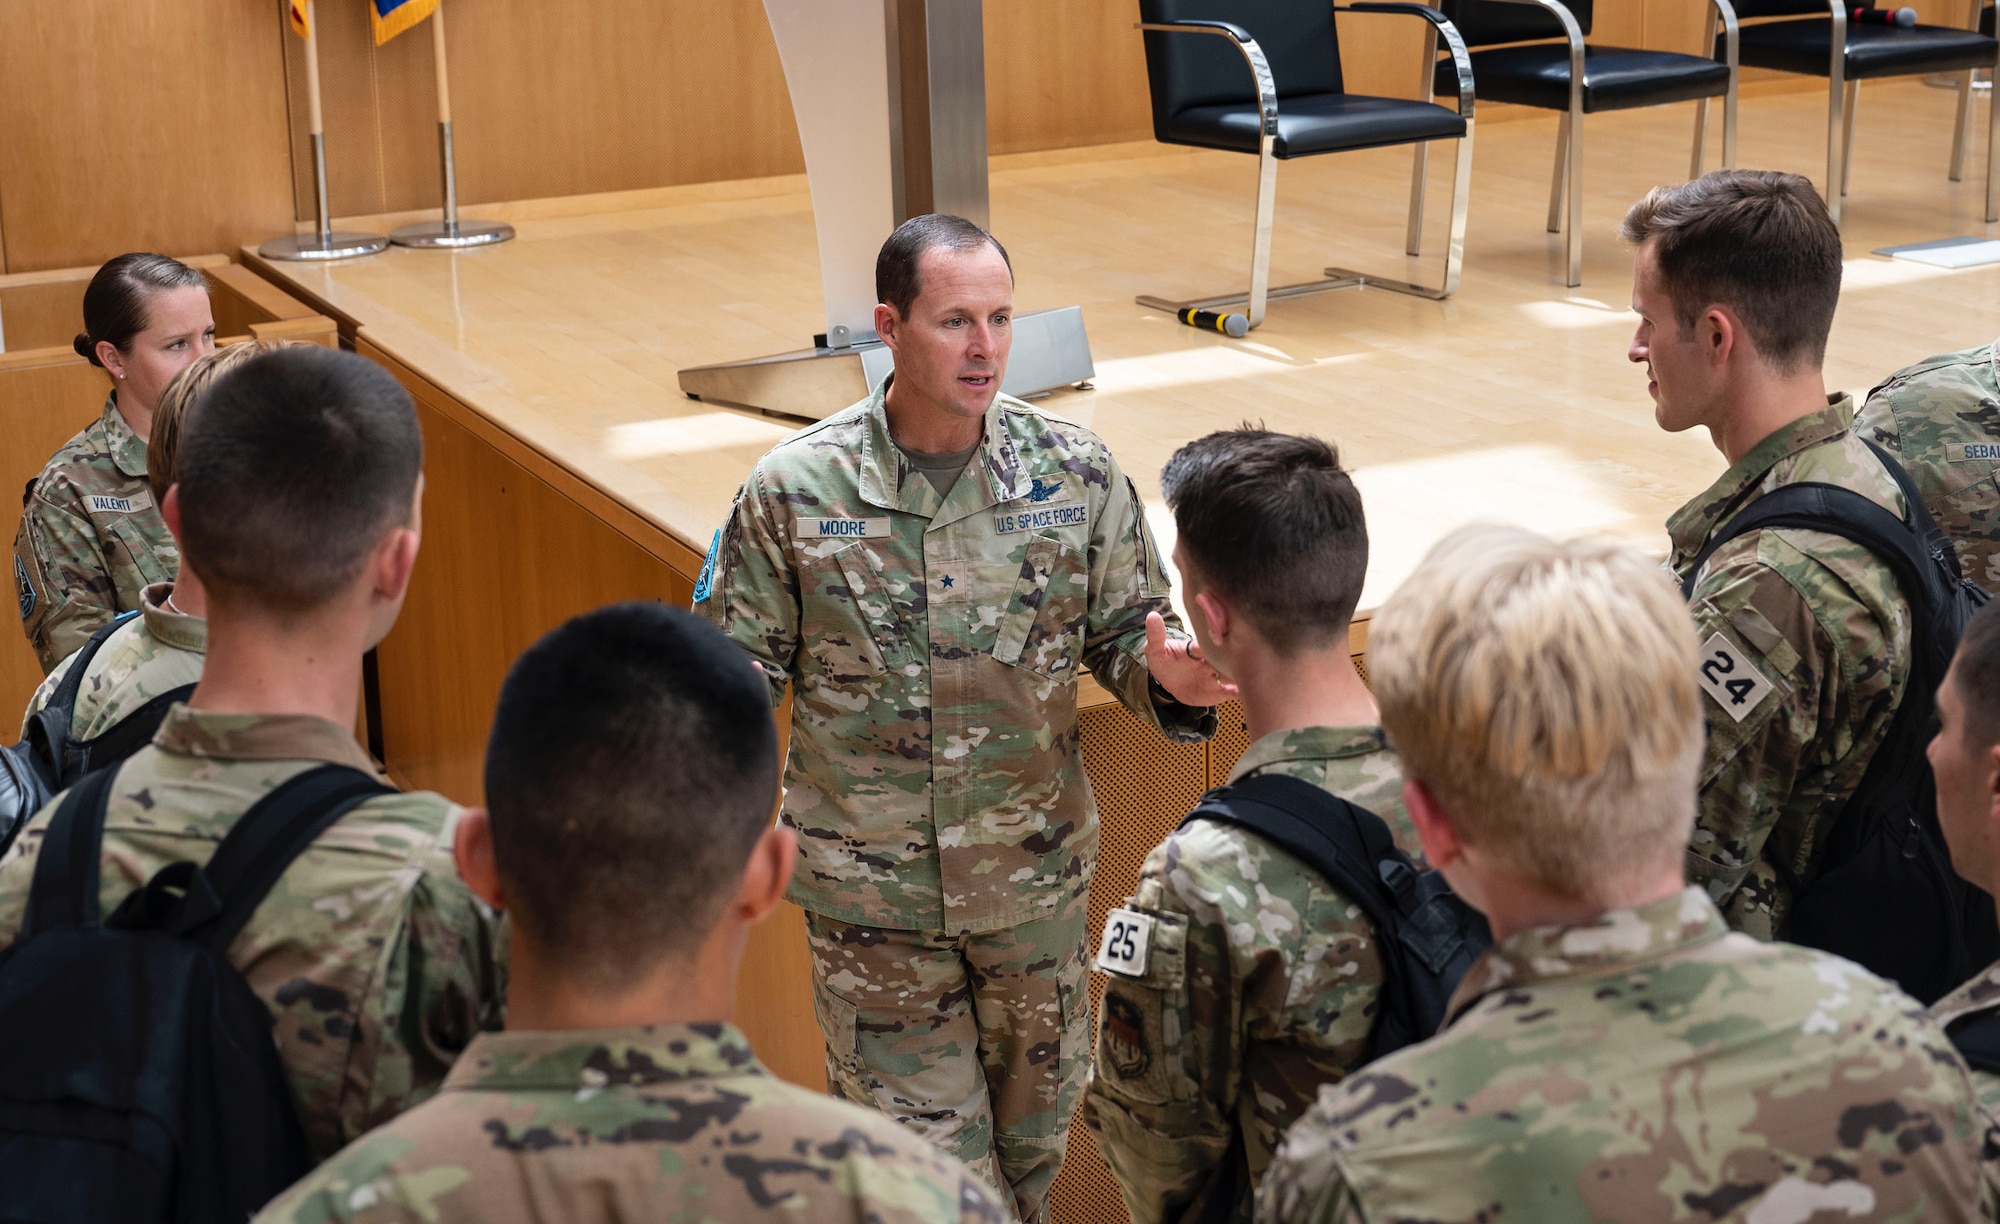 Brig. Gen. Todd Moore, Space Training and Readiness Command deputy commander, meets with aspirational space cadets at the U.S. Air Force Academy